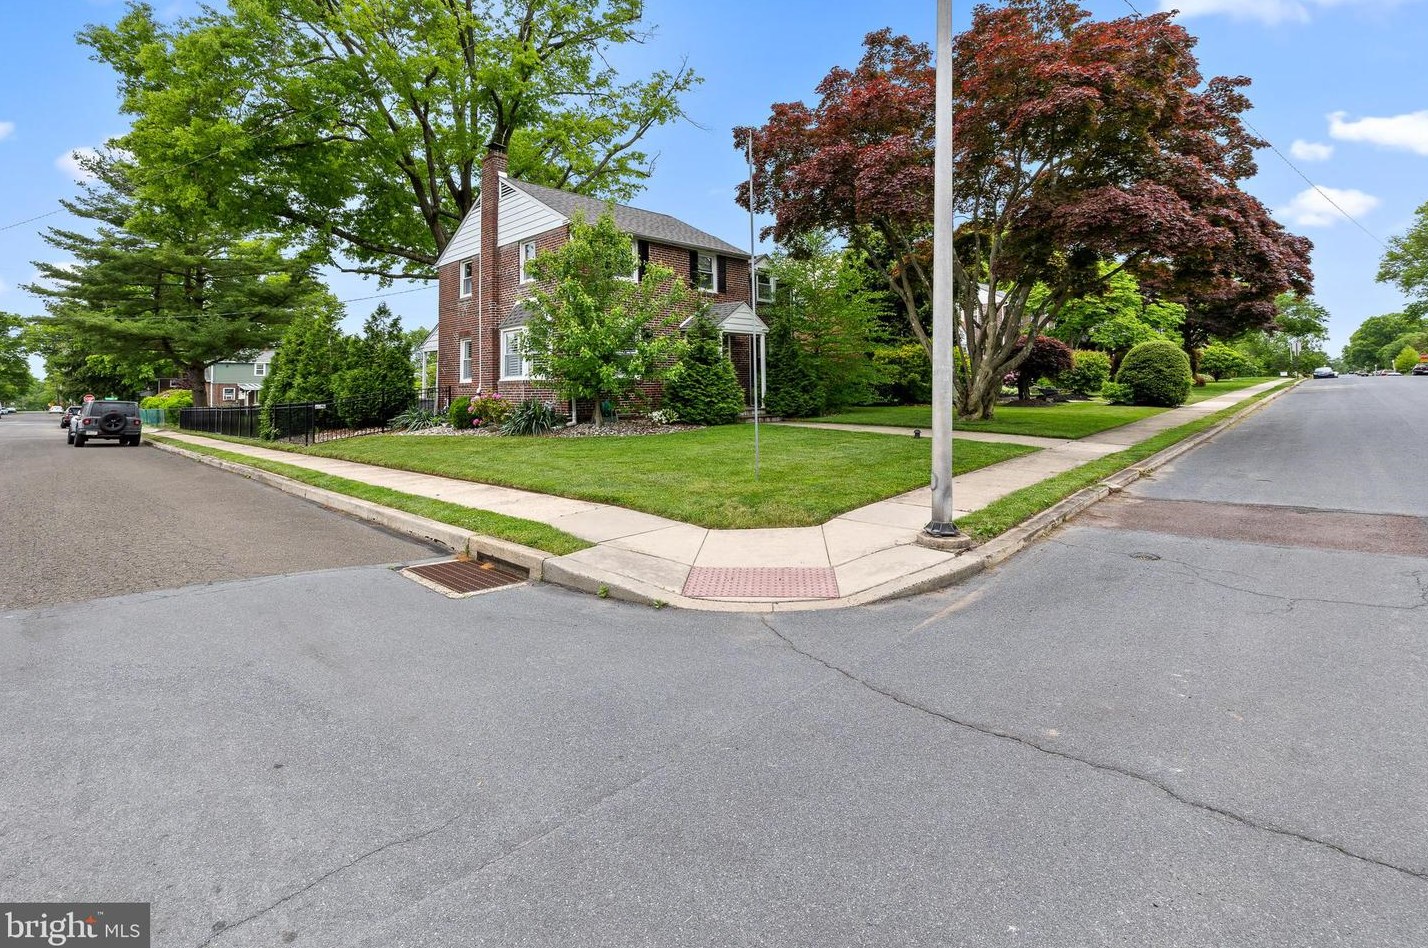 500 Delaware Ave, Lansdale, PA 19446